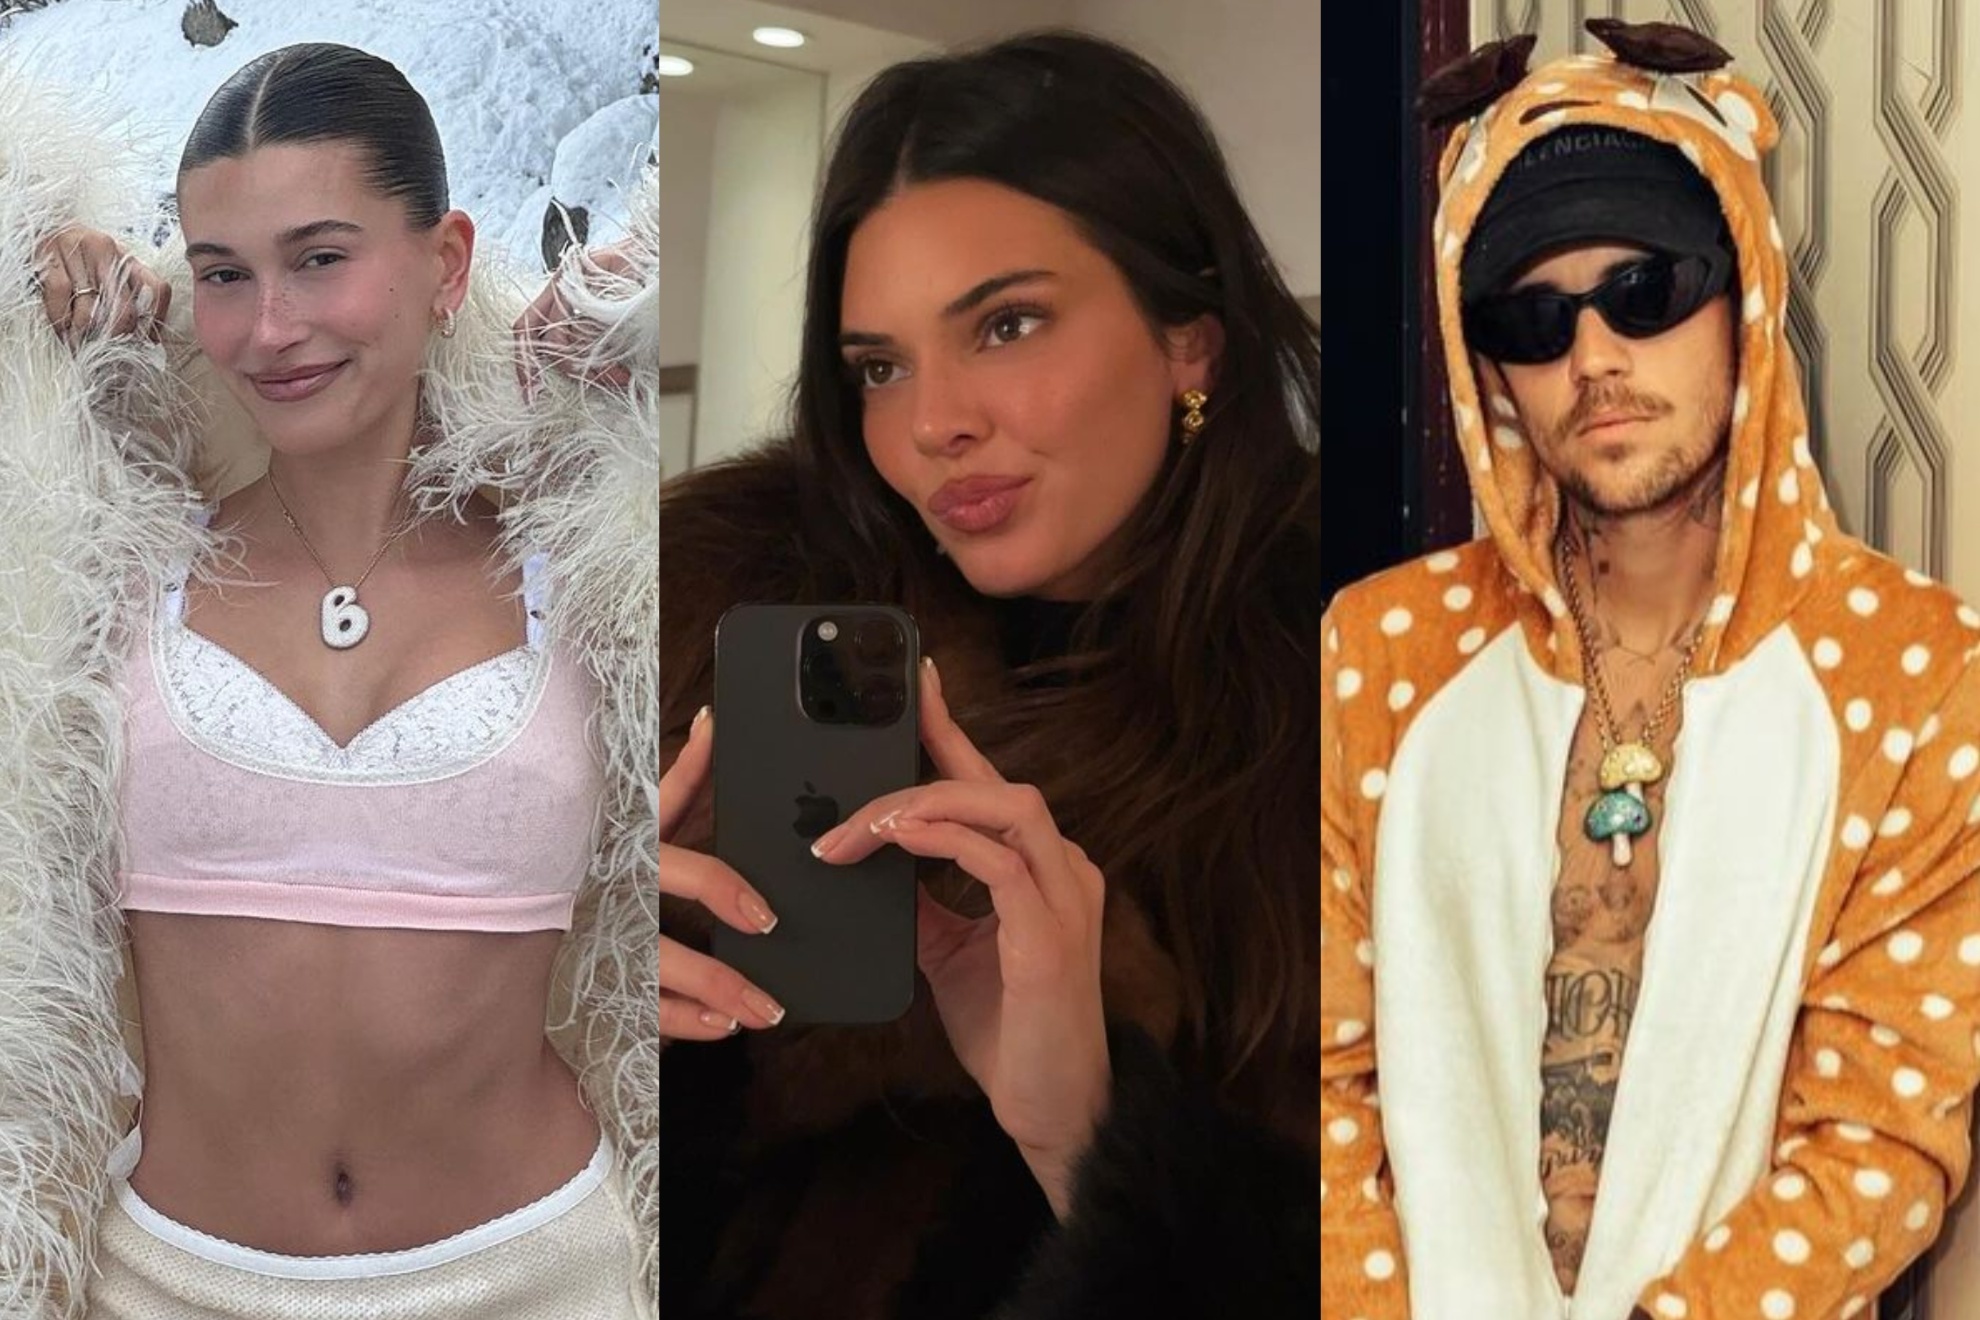 Kendall Jenner has been spotted hanging out with Justin and Hailey Bieber in Aspen, Colorado